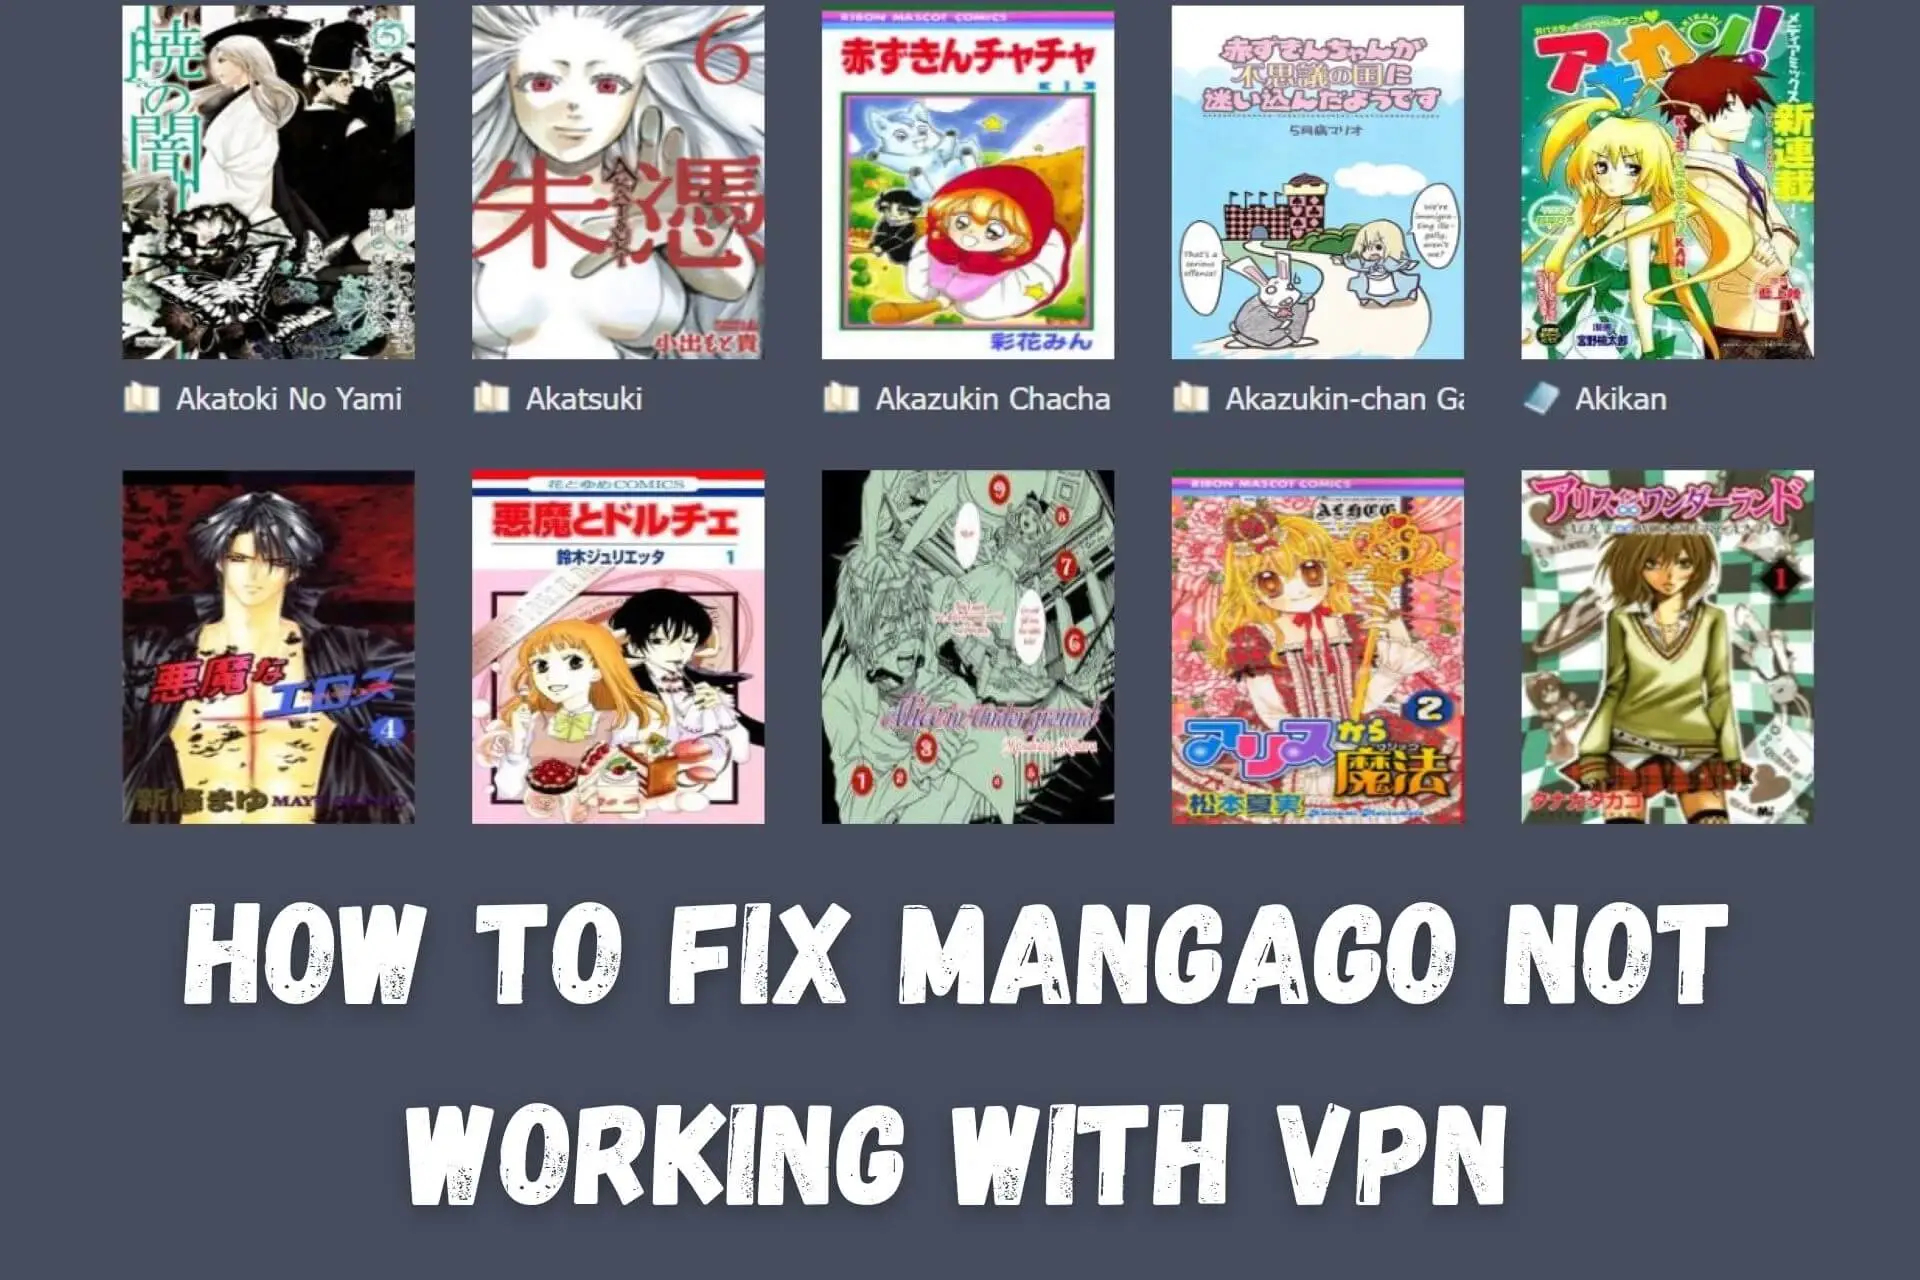 mangago not working with vpn